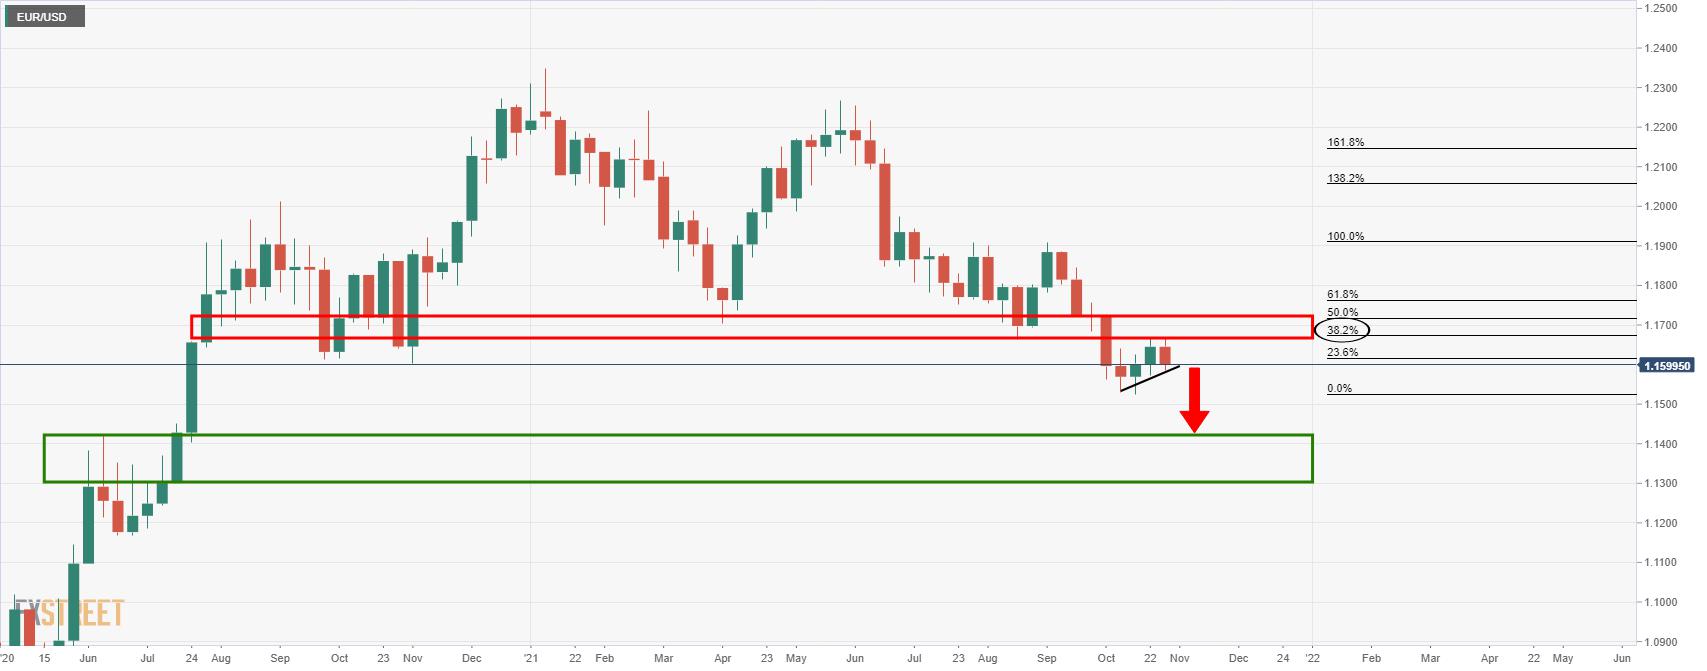 EUR/USD Price Analysis: A mixed technical picture leaning with slight bearish bias